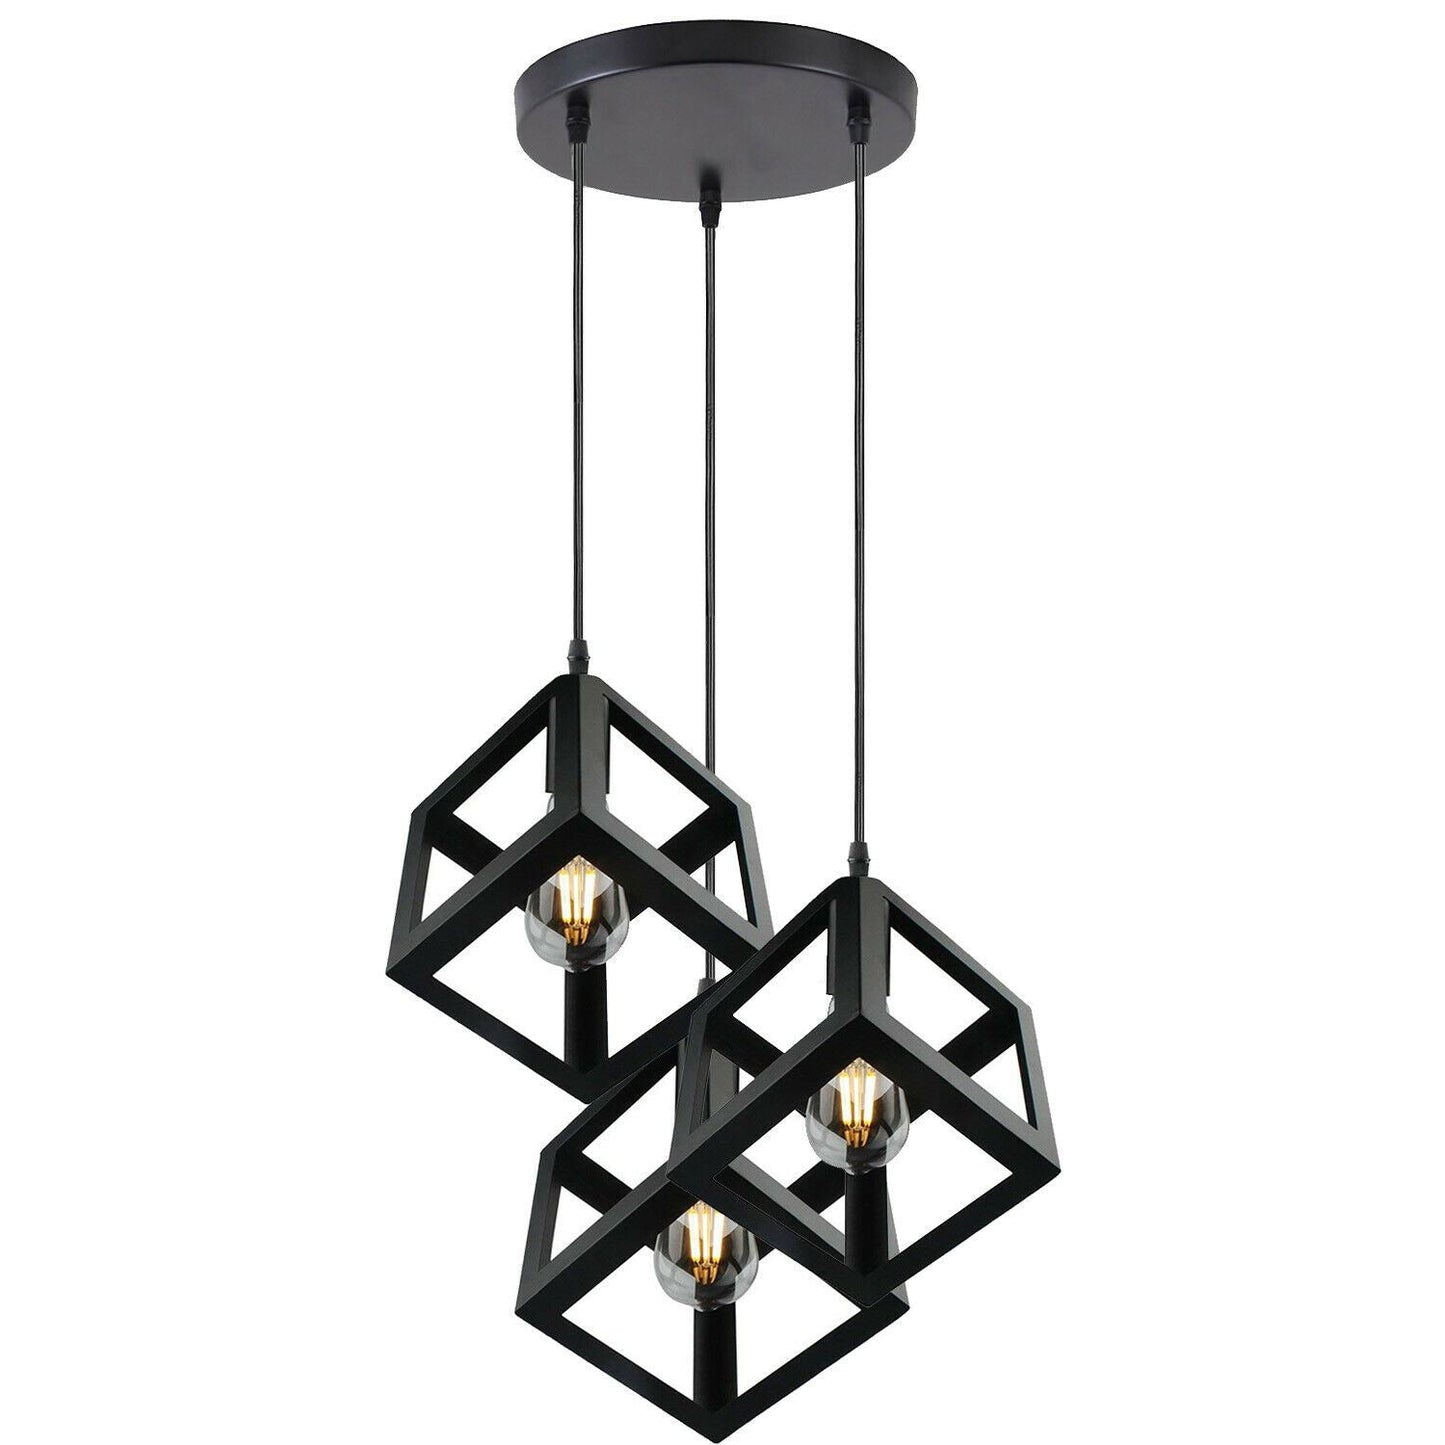 Square Shaped Metal Lamp Shade Industrial Retro Loft Style Suspended Ceiling Pendant Light~2531